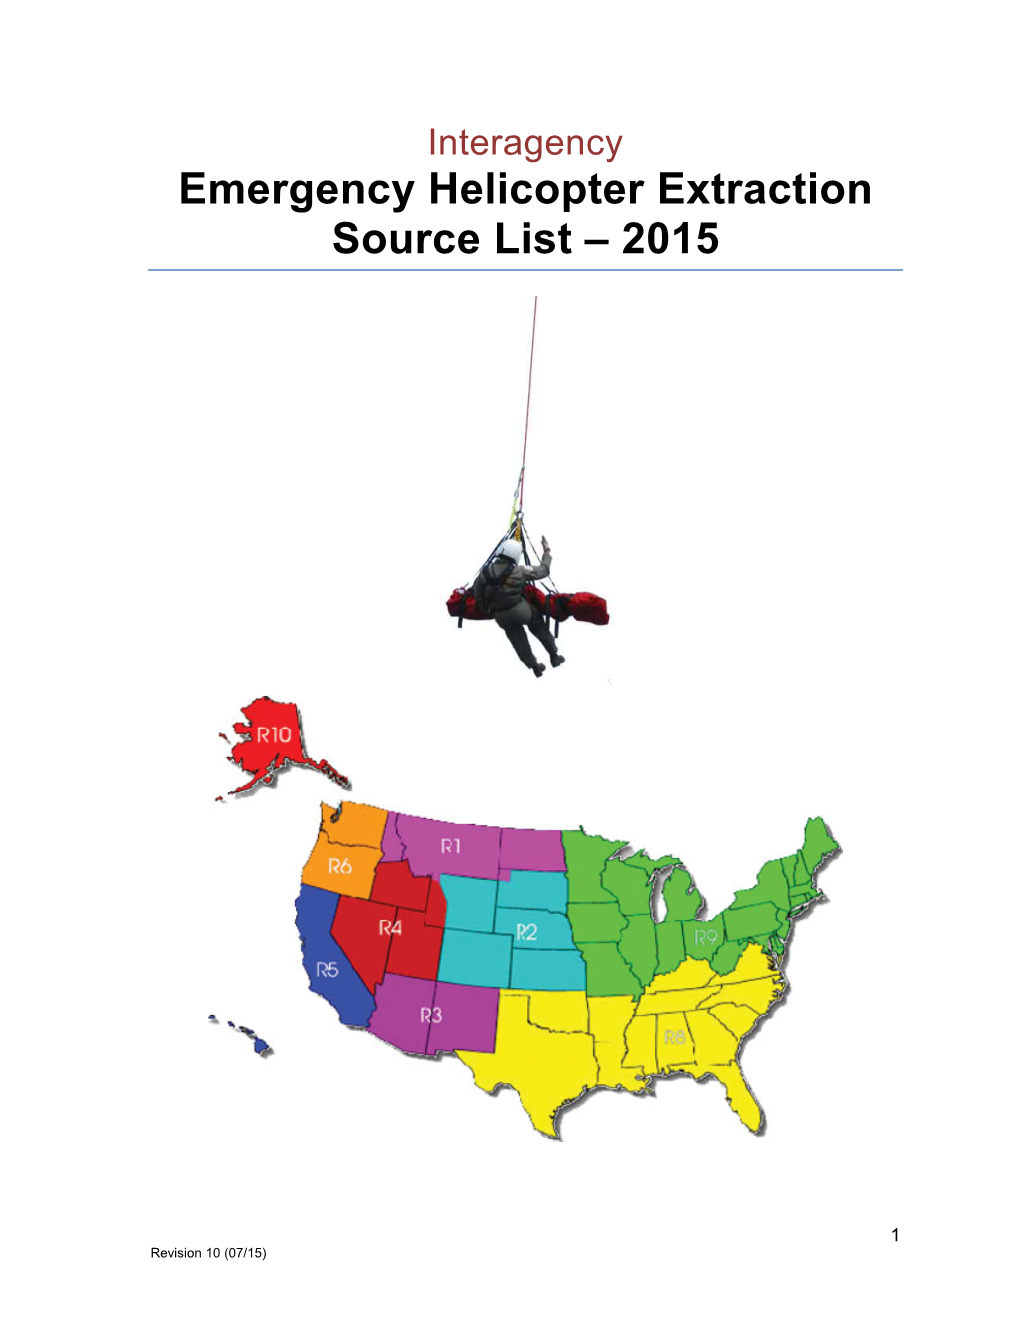 Interagency Emergency Helicopter Extraction Source List – 2015